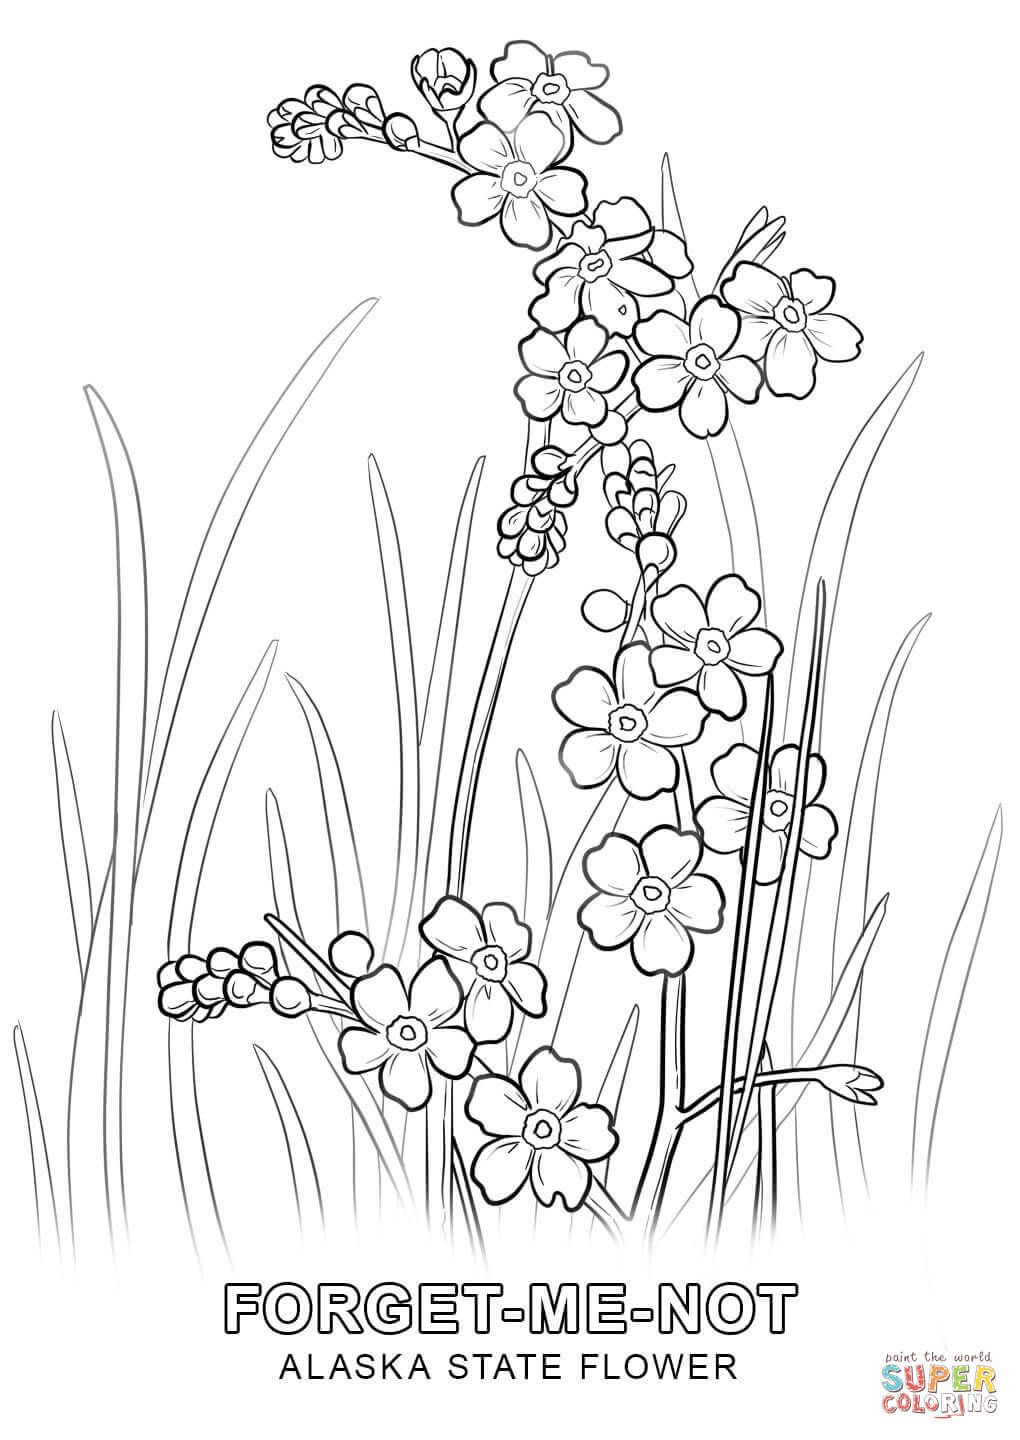 Alaska State Flower Coloring Page | Free Printable Coloring Pages - Free Printable Pictures Of Alaska